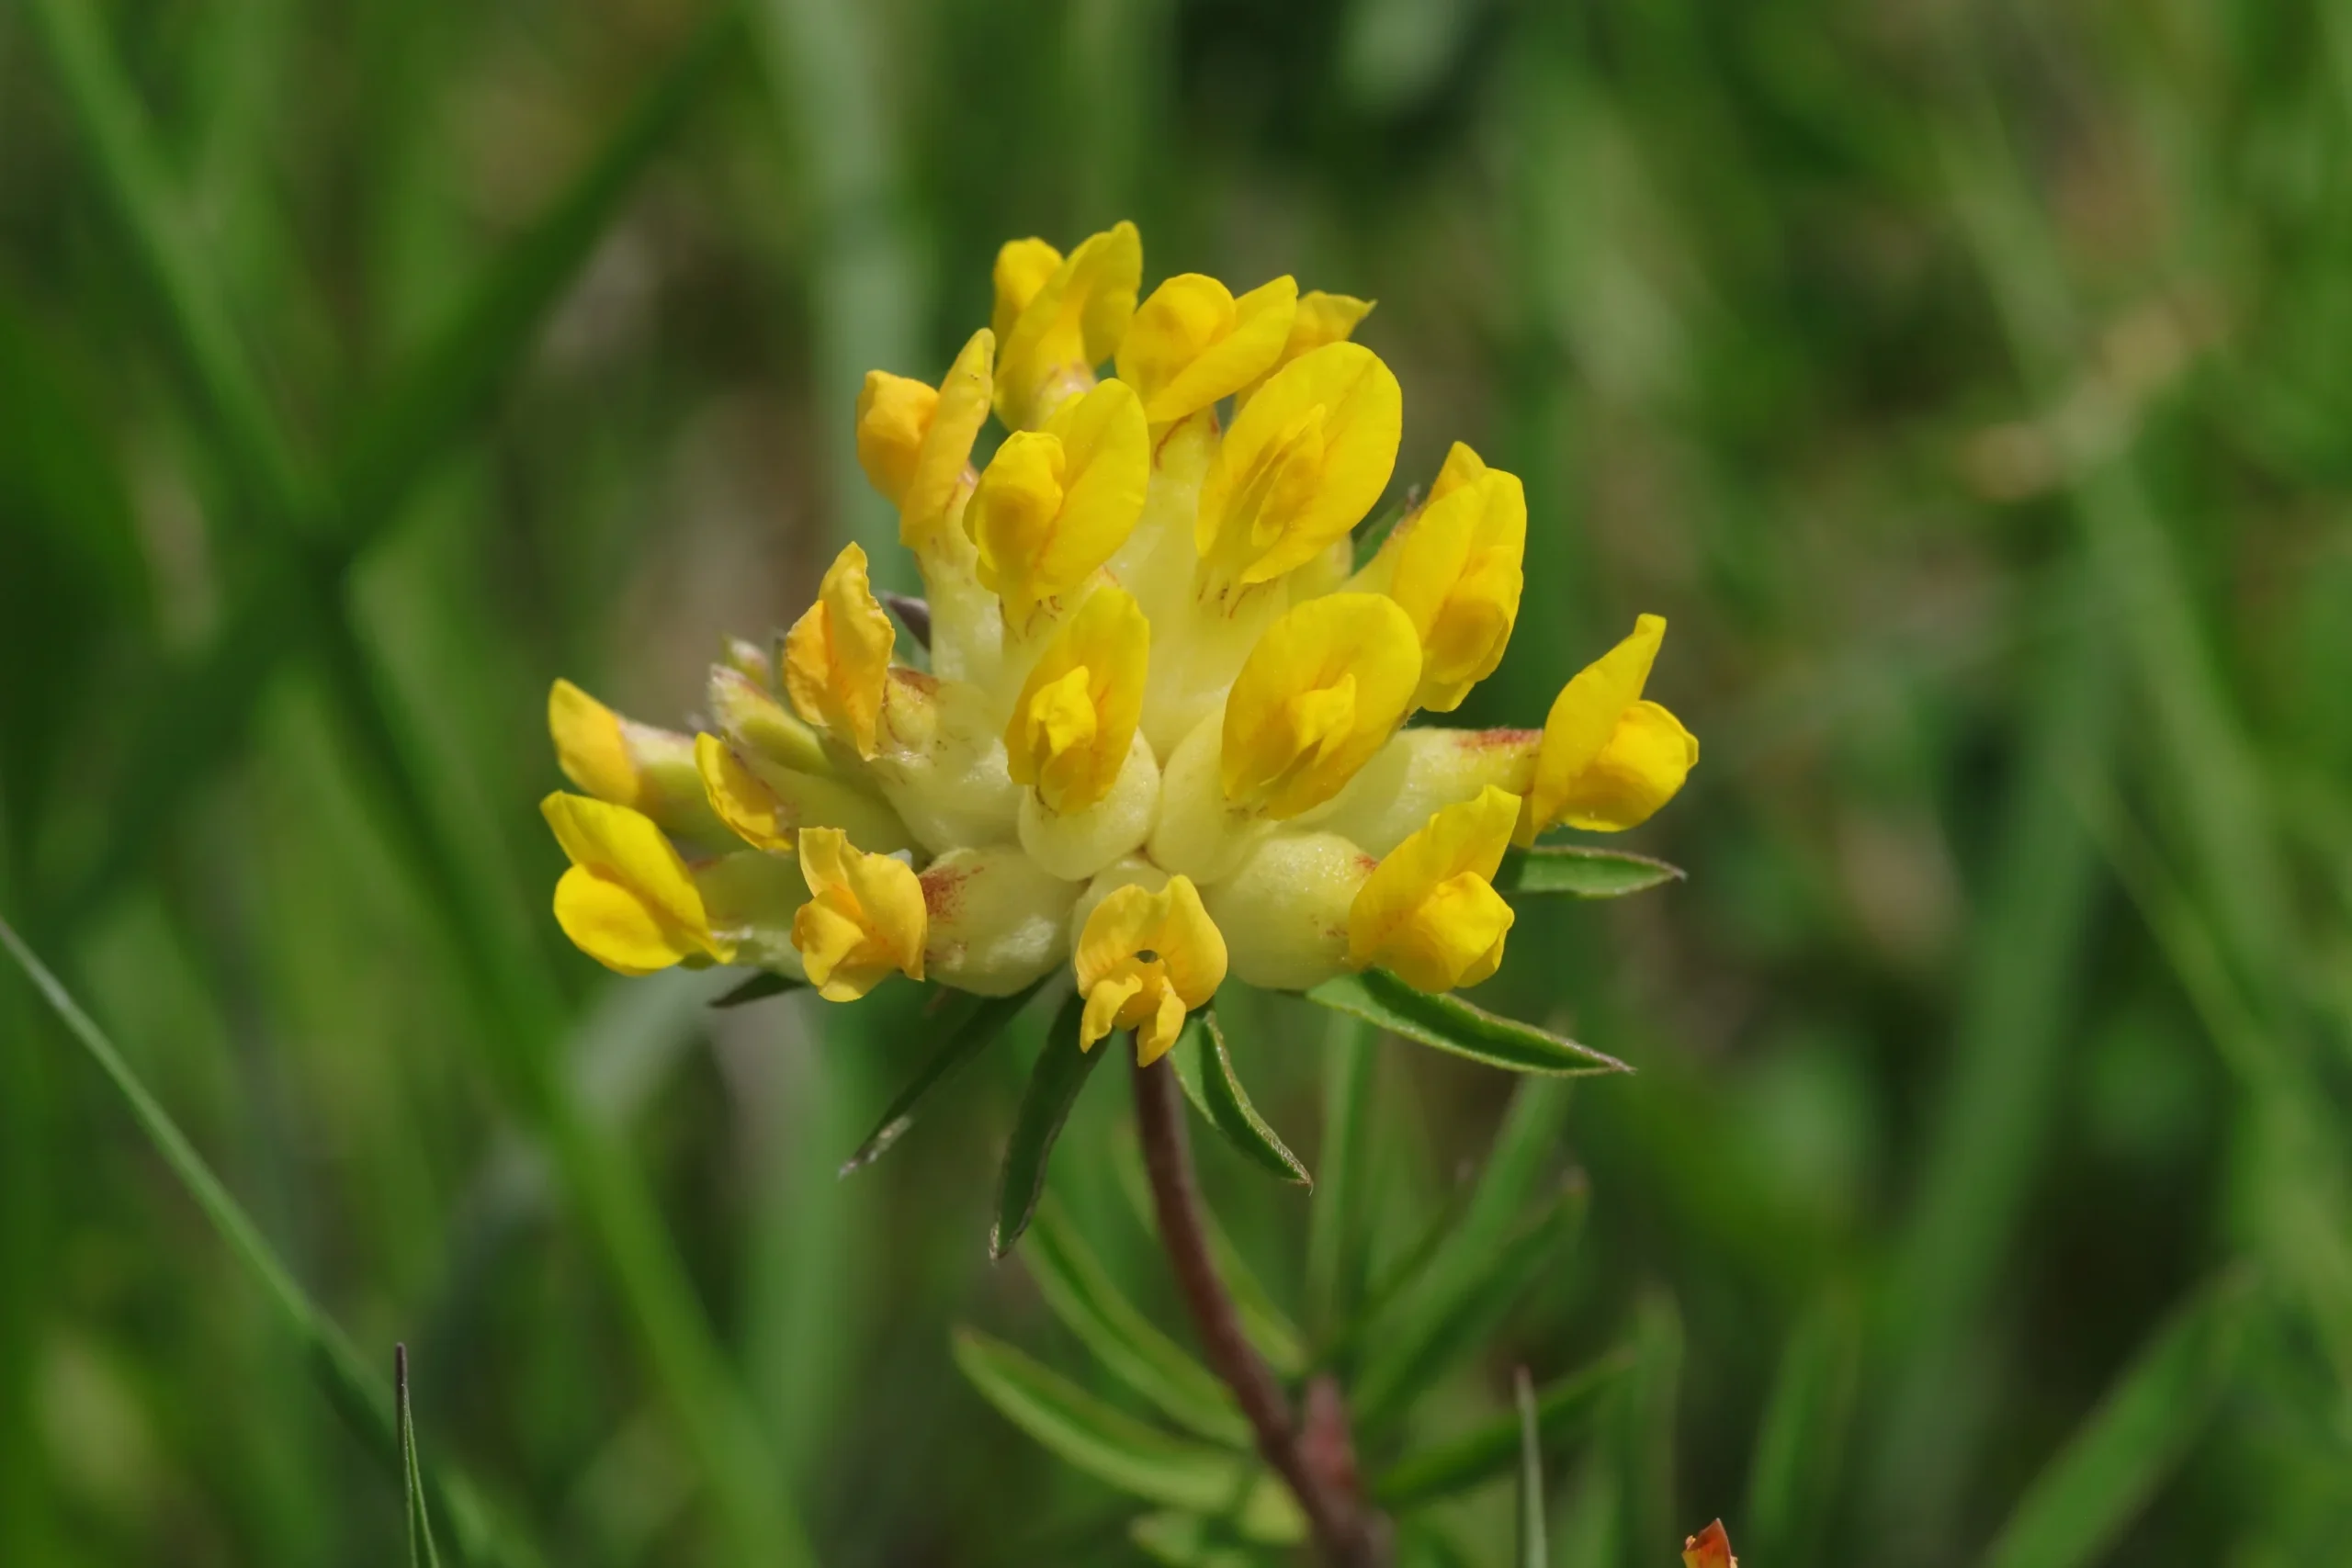 Kidney vetch - flower in detail. The yellow inflorescences consist of a large number of individual butterfly-shaped flowers.